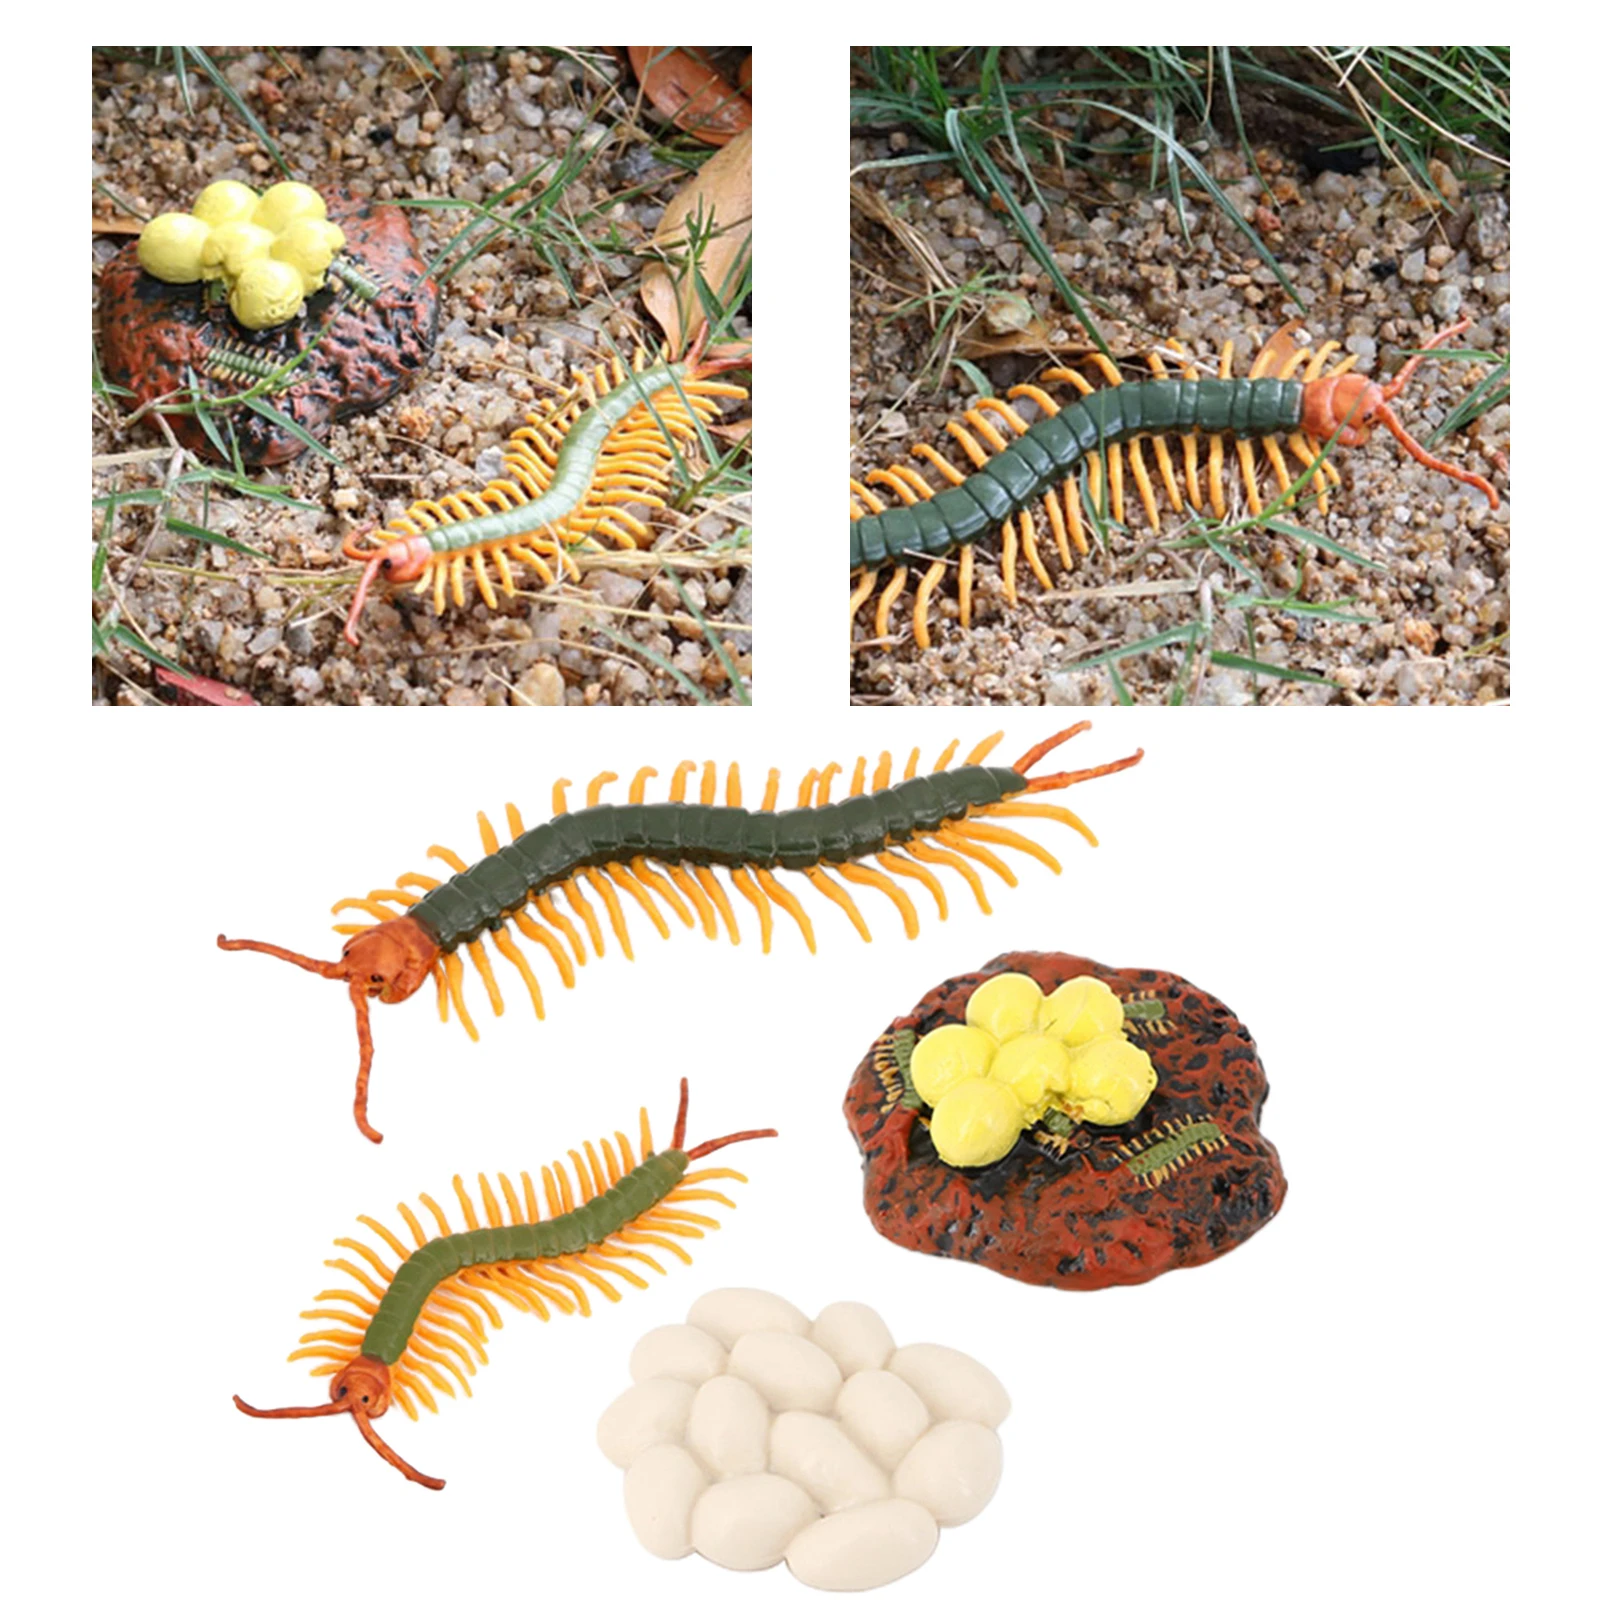 Life Cycle of a CentipedeNature Insects Life Cycles Growth Model Game PropSimulation Insect Animal Natural Education Toy